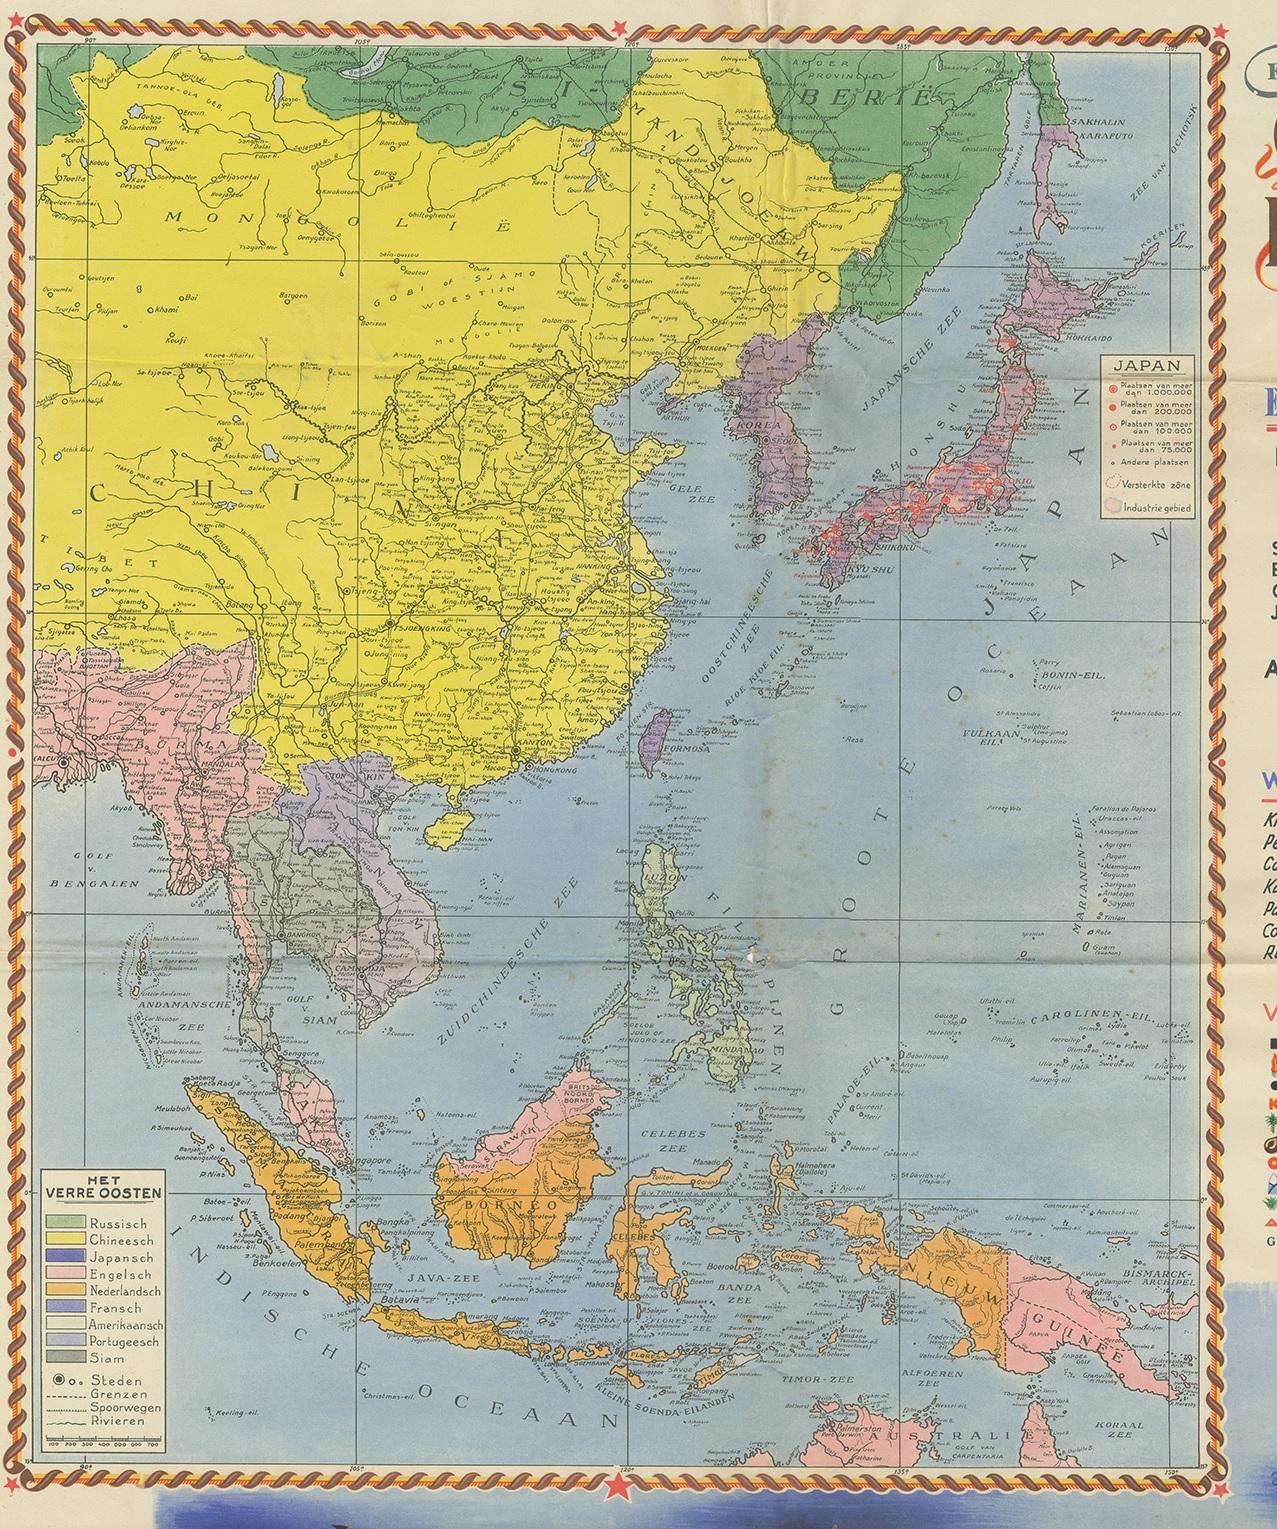 Beautiful poster of the Dutch East Indies titled 'Het Verre Oosten'. This poster includes a large map of the East Indies with detailed legend. Below a decorative map of Indonesia including Borneo, Sumatra, Java, Celebes and Guinea.